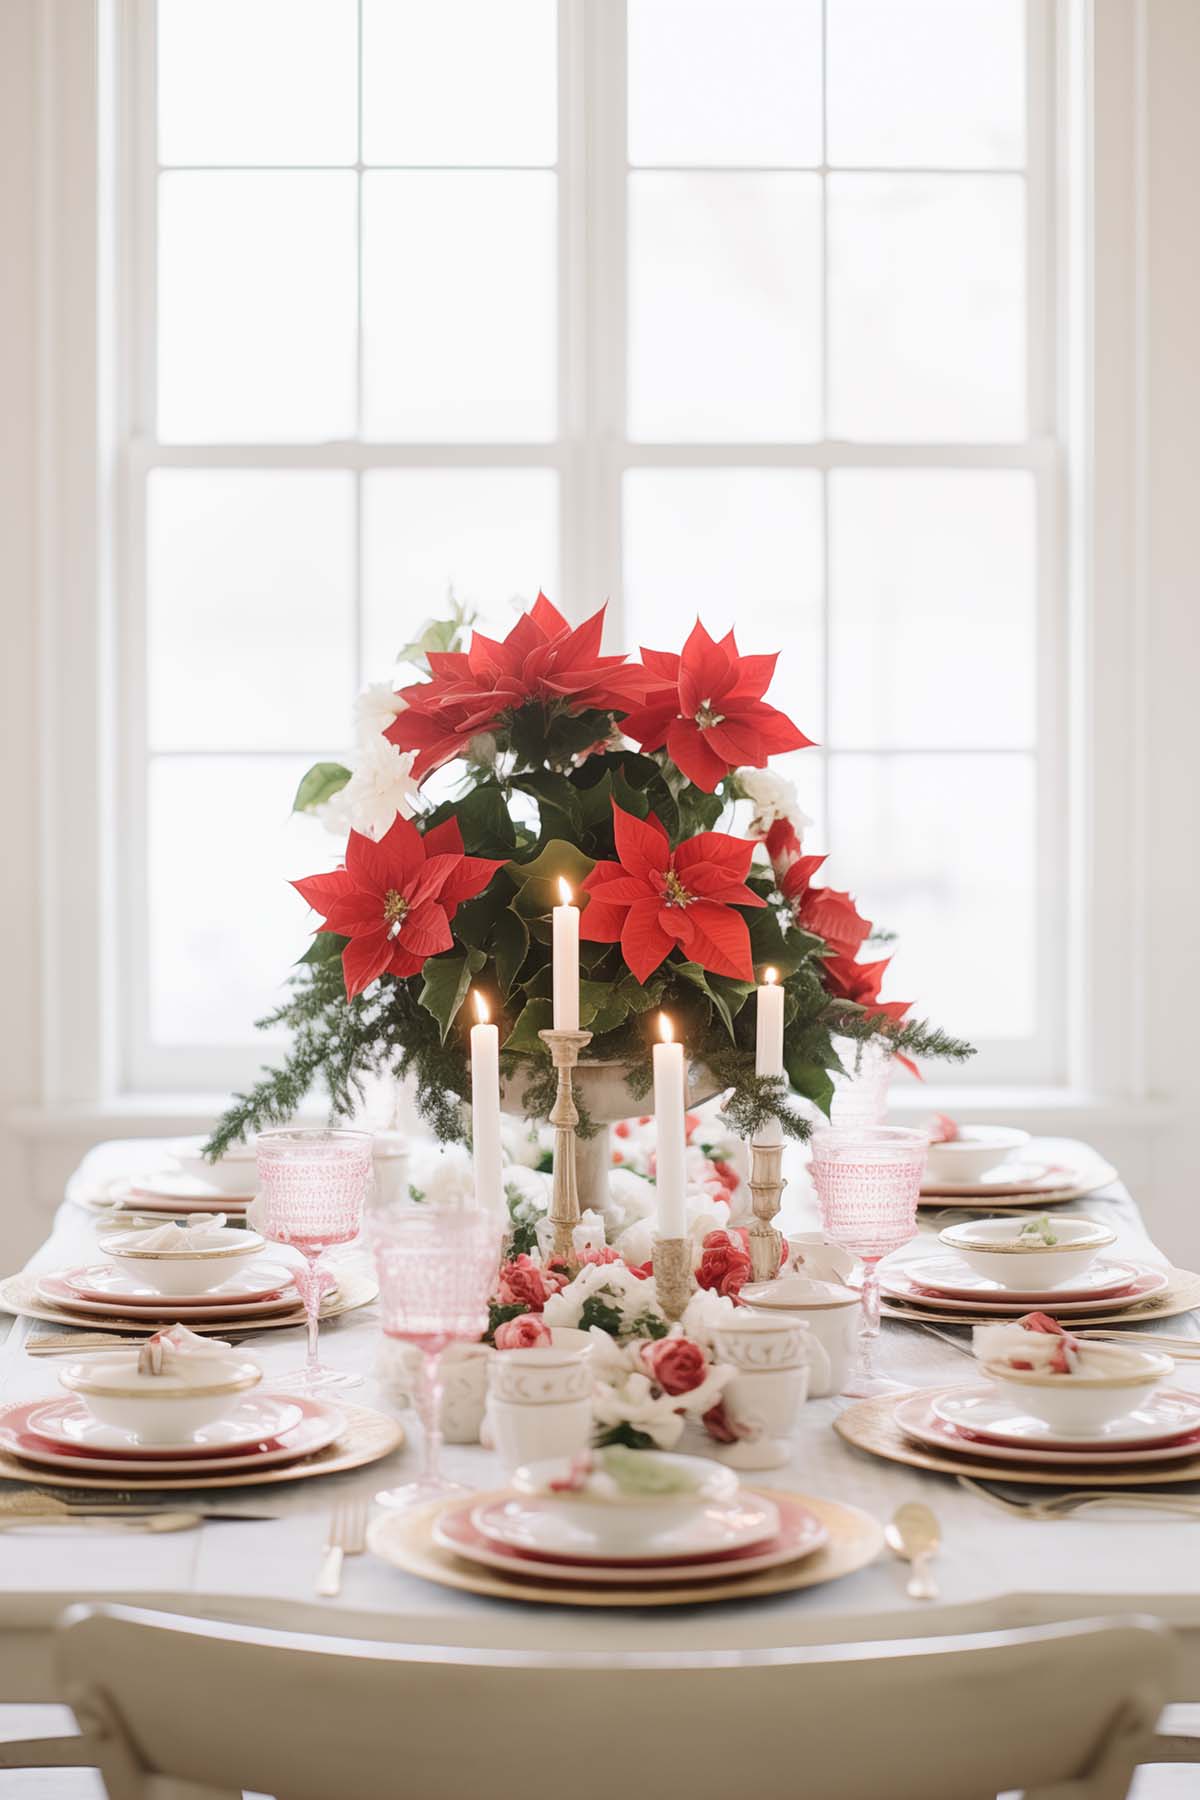 poinsettia plant in a raised urn in the center of a table surrounded by place settings and pink goblets.